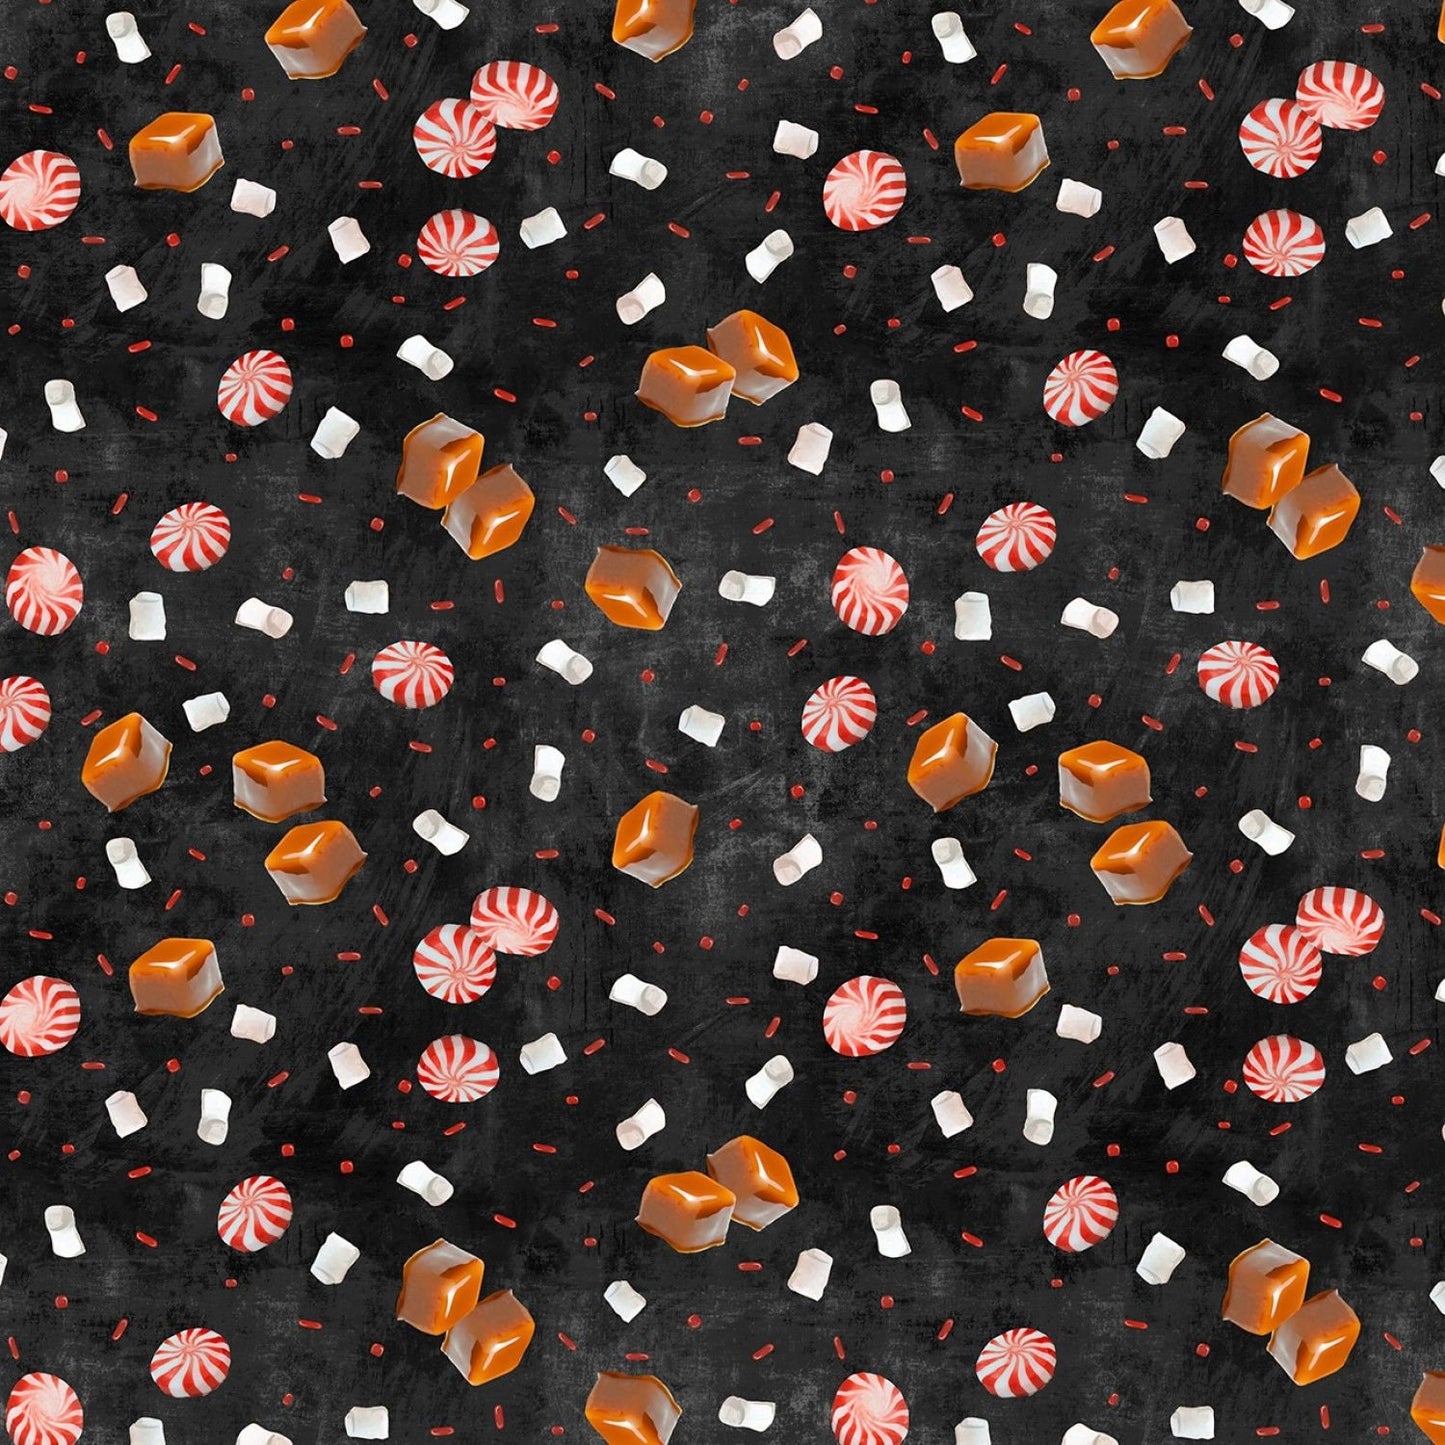 Time For Hot Cocoa by Conrad Knutsen Candy Toss Black 30525-923 Cotton Woven Fabric